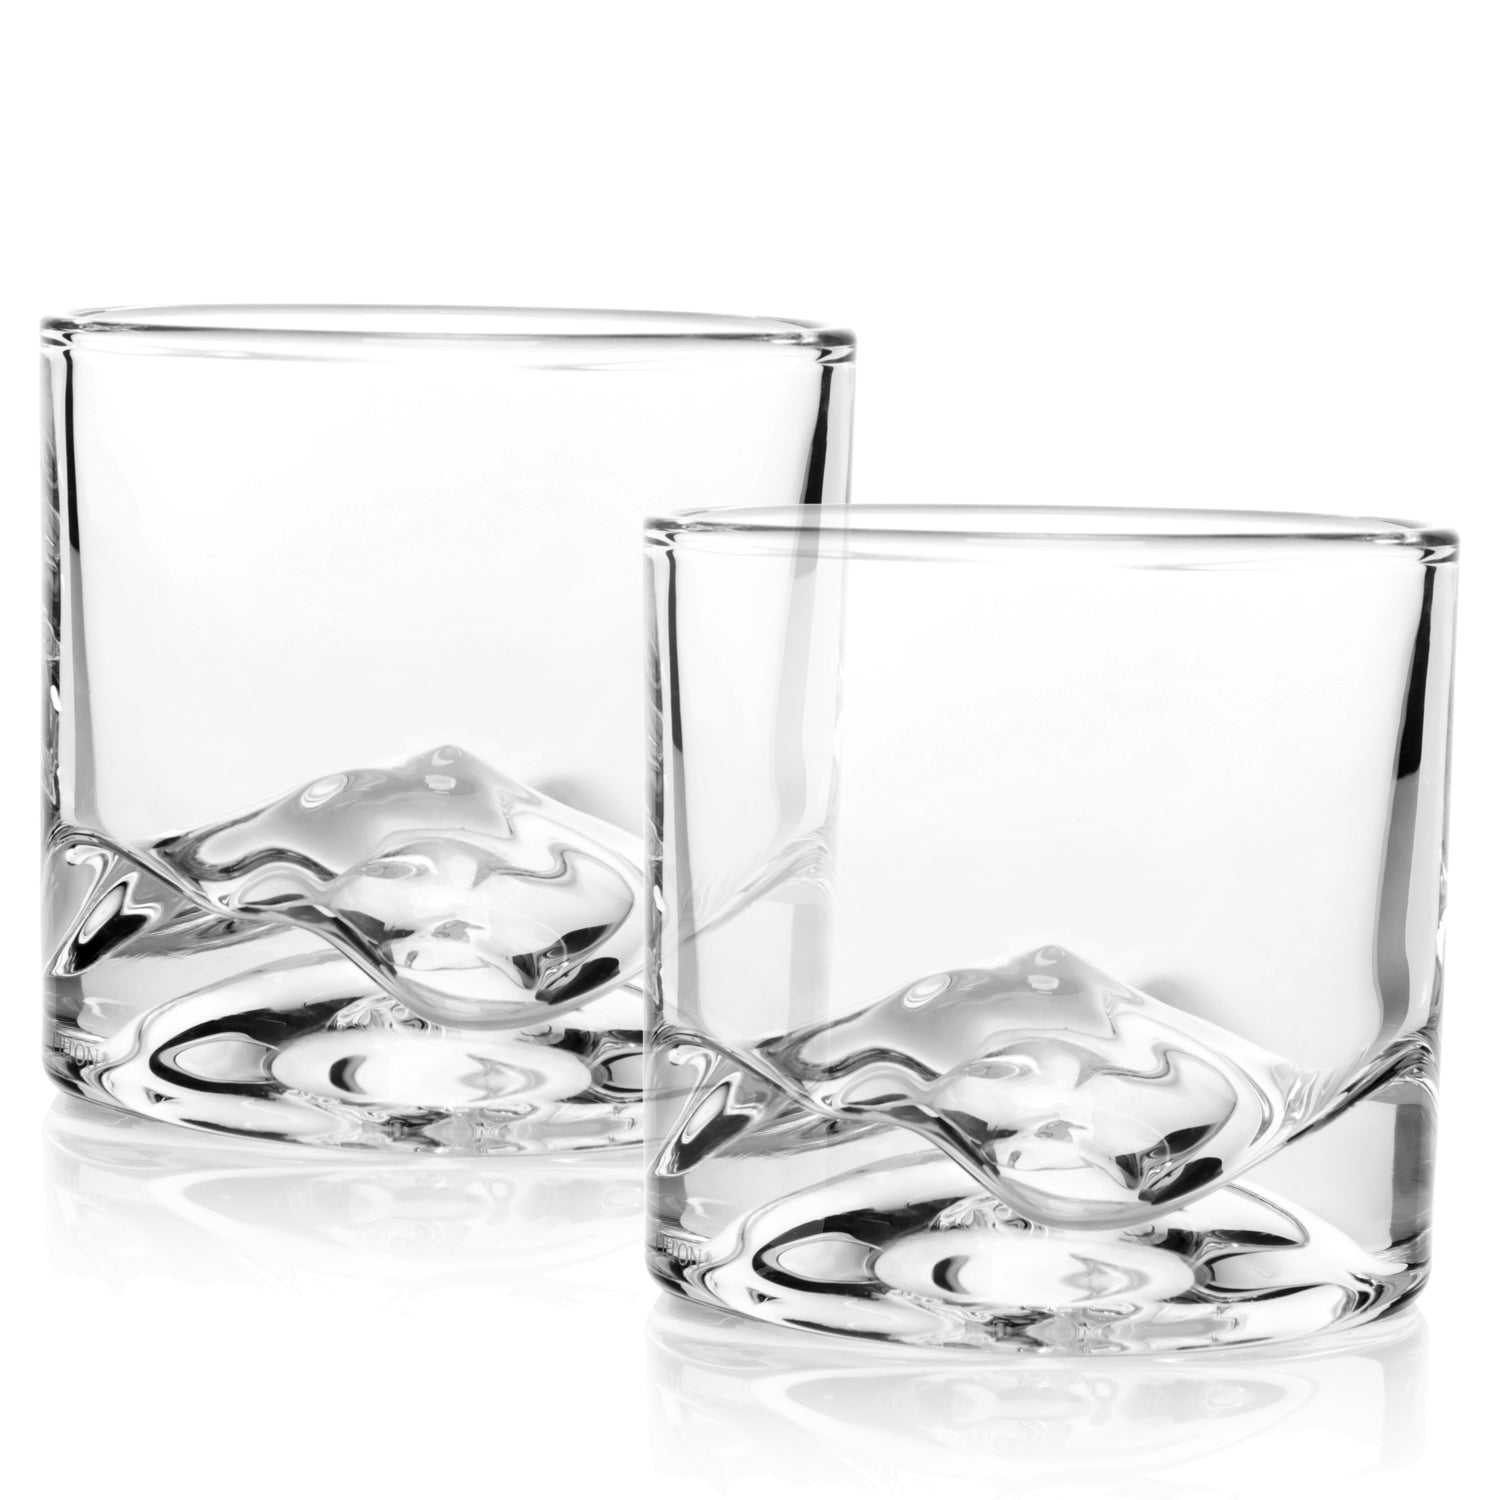 Elevate Your Barware Collection with Stylish Liquor Glasses